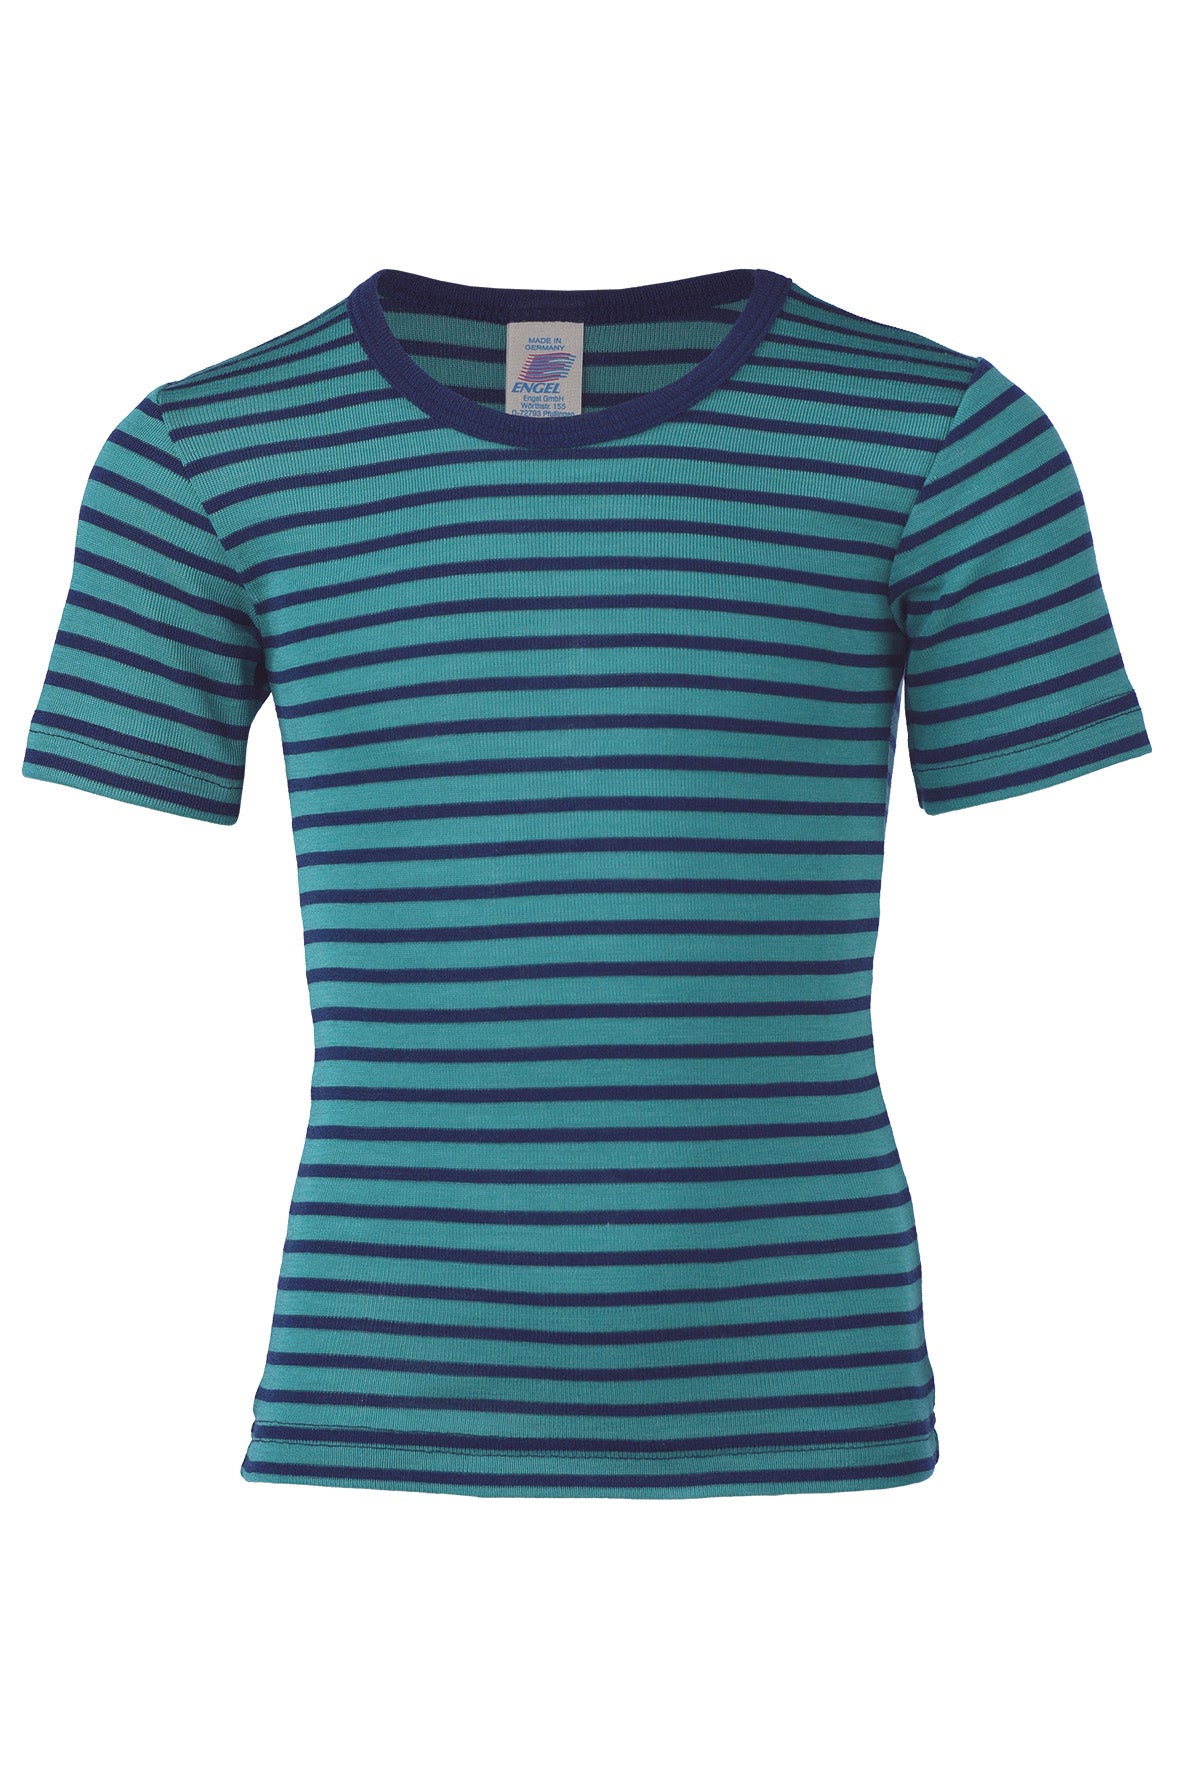 Engel striped tee made of a wool/silk blend in ice blue and navy. 